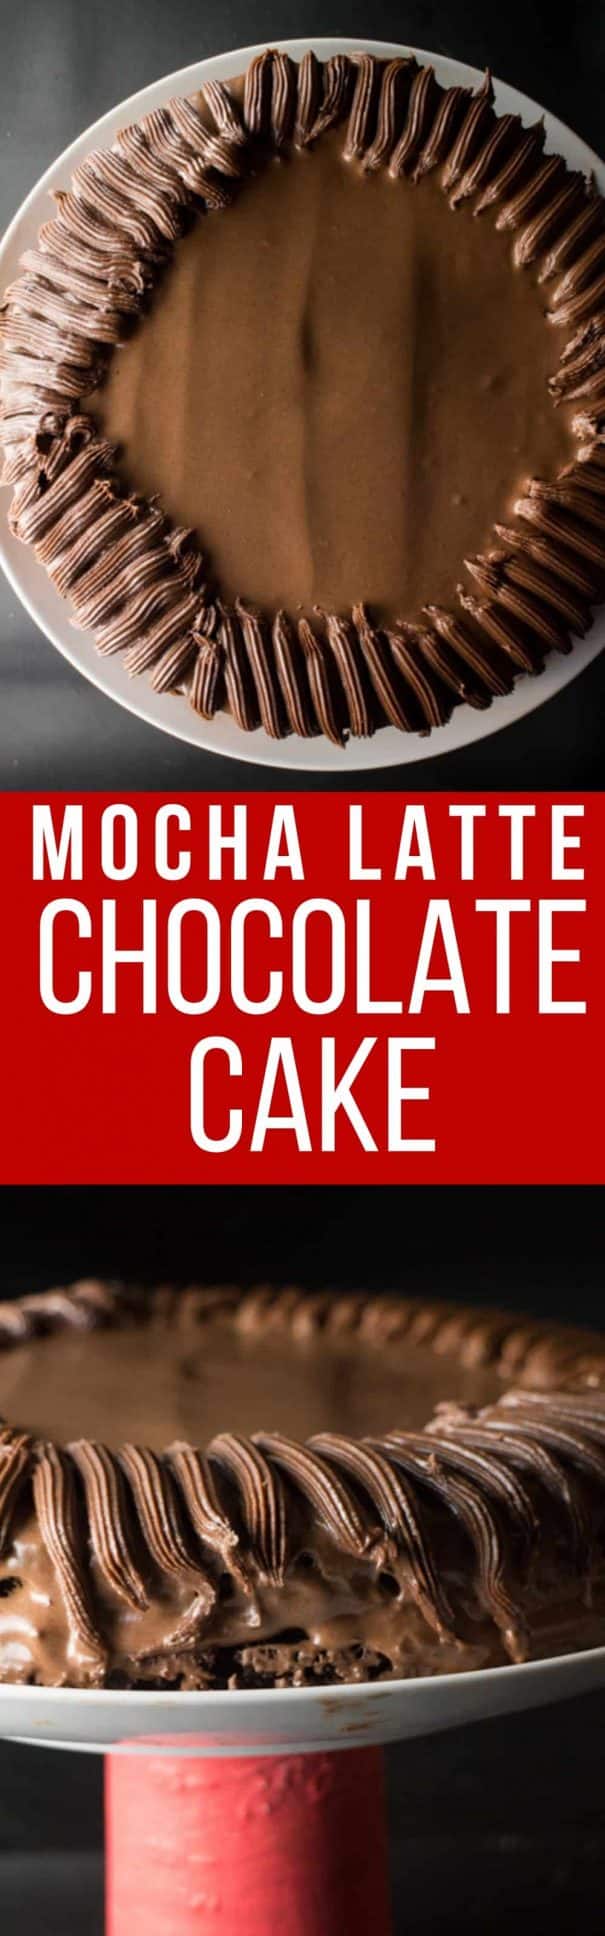 This Mocha Latte Moist Chocolate Cake is double the chocolate and extra moist.  This easy to make coffee dessert recipe is covered with rich chocolate frosting! 